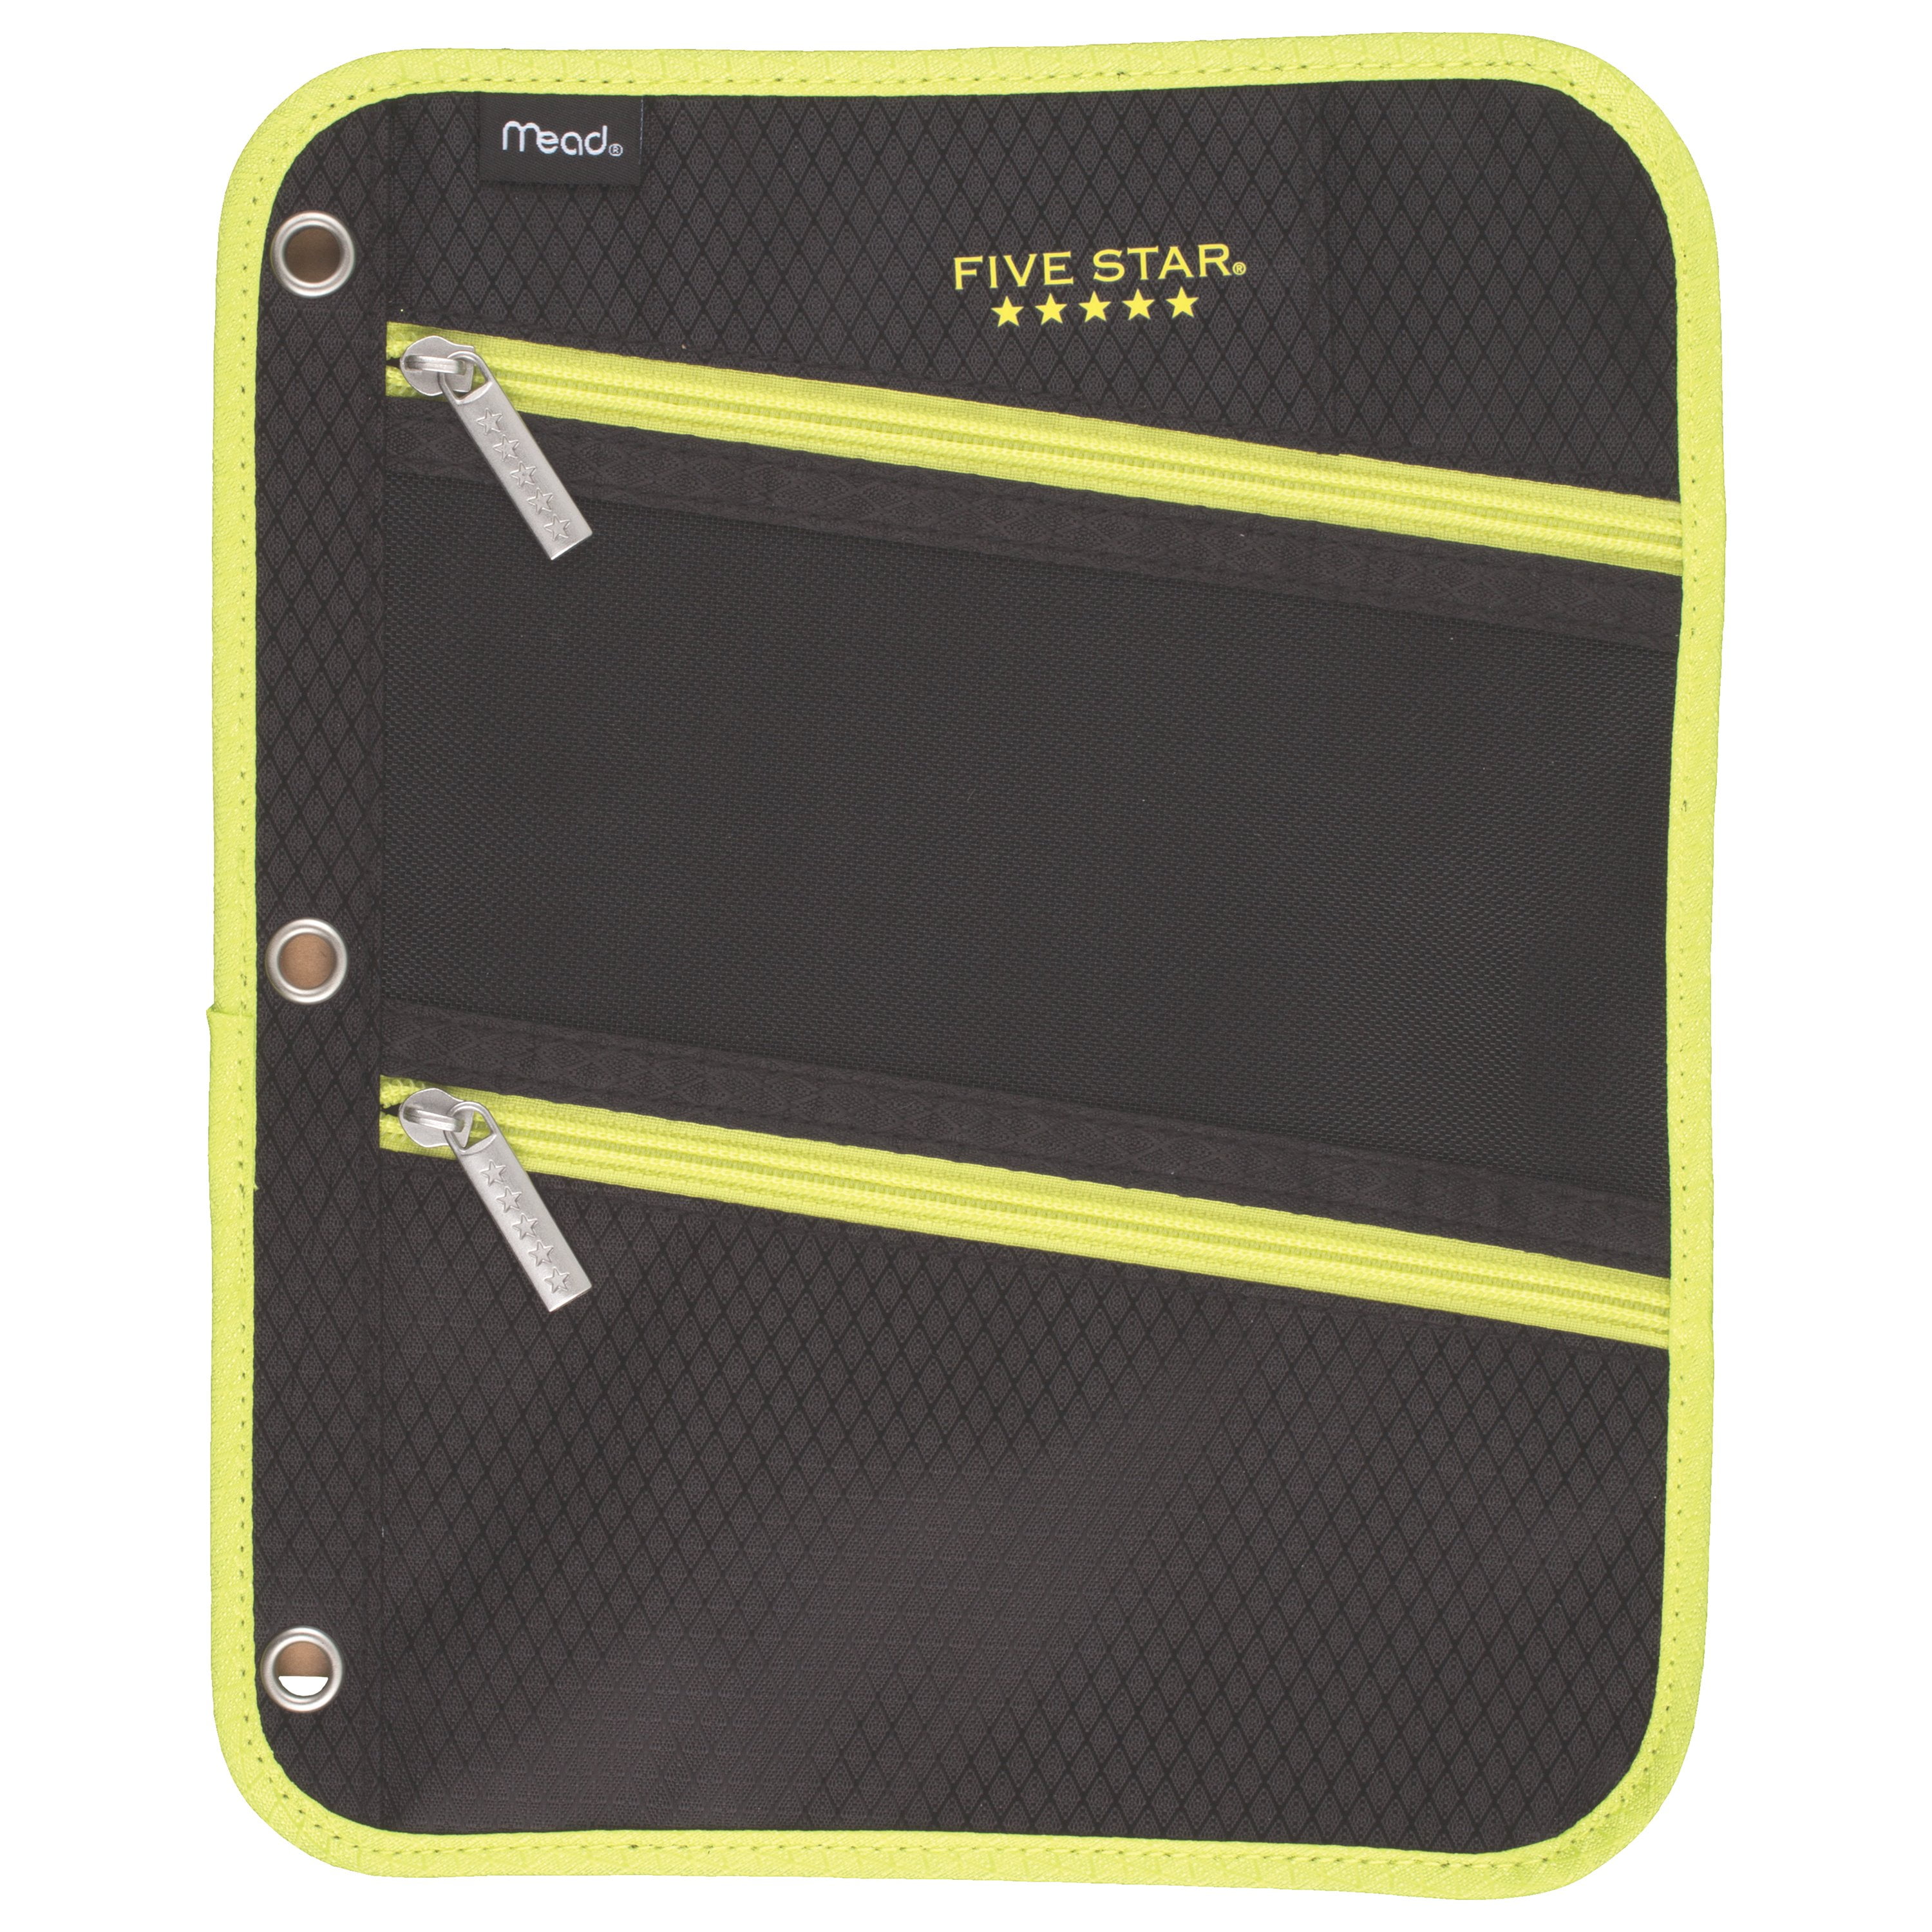 Details about   Mead Five Star Pencil Pouch for Binders 3 Zippered Compartments 11" x 8 3/4" 